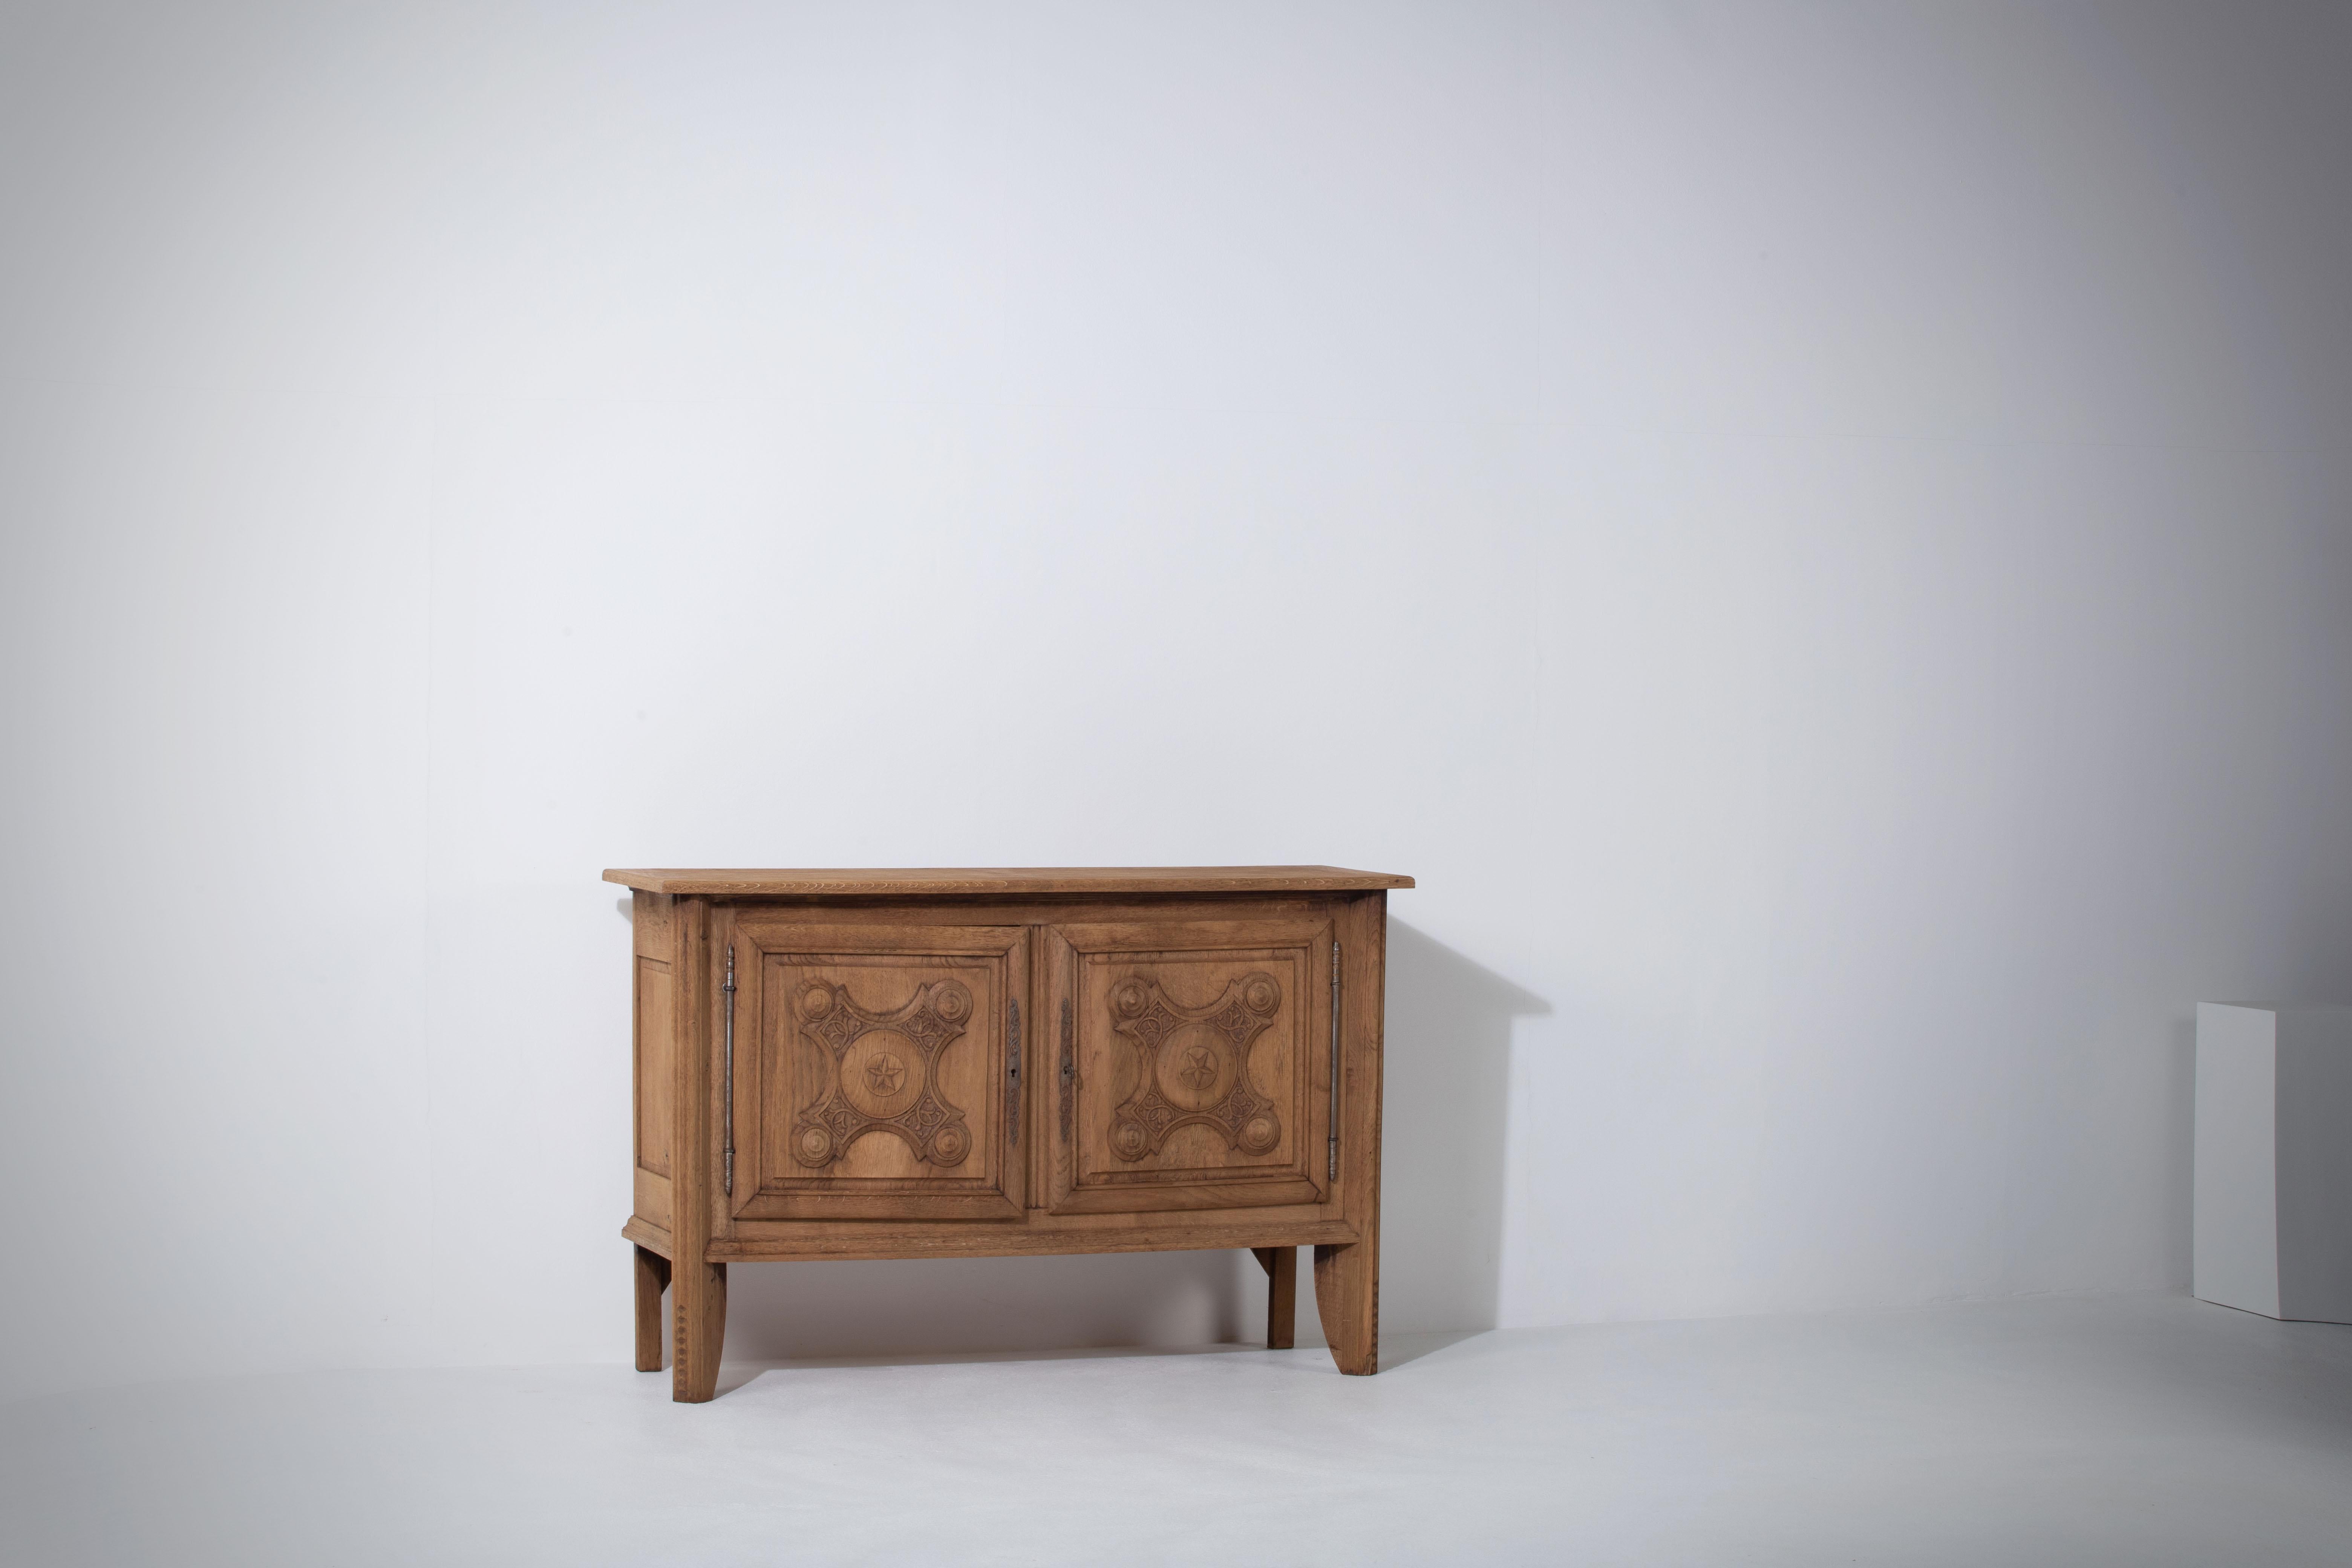 A matching sideboard is available.
Brutalist solid elm credenza.
The buffet features stunning oak structure on door panels. It offers ample storage, with shelve behind the doors. 
A unique blend of Art Deco Spanish and Brutalist Modern design. The